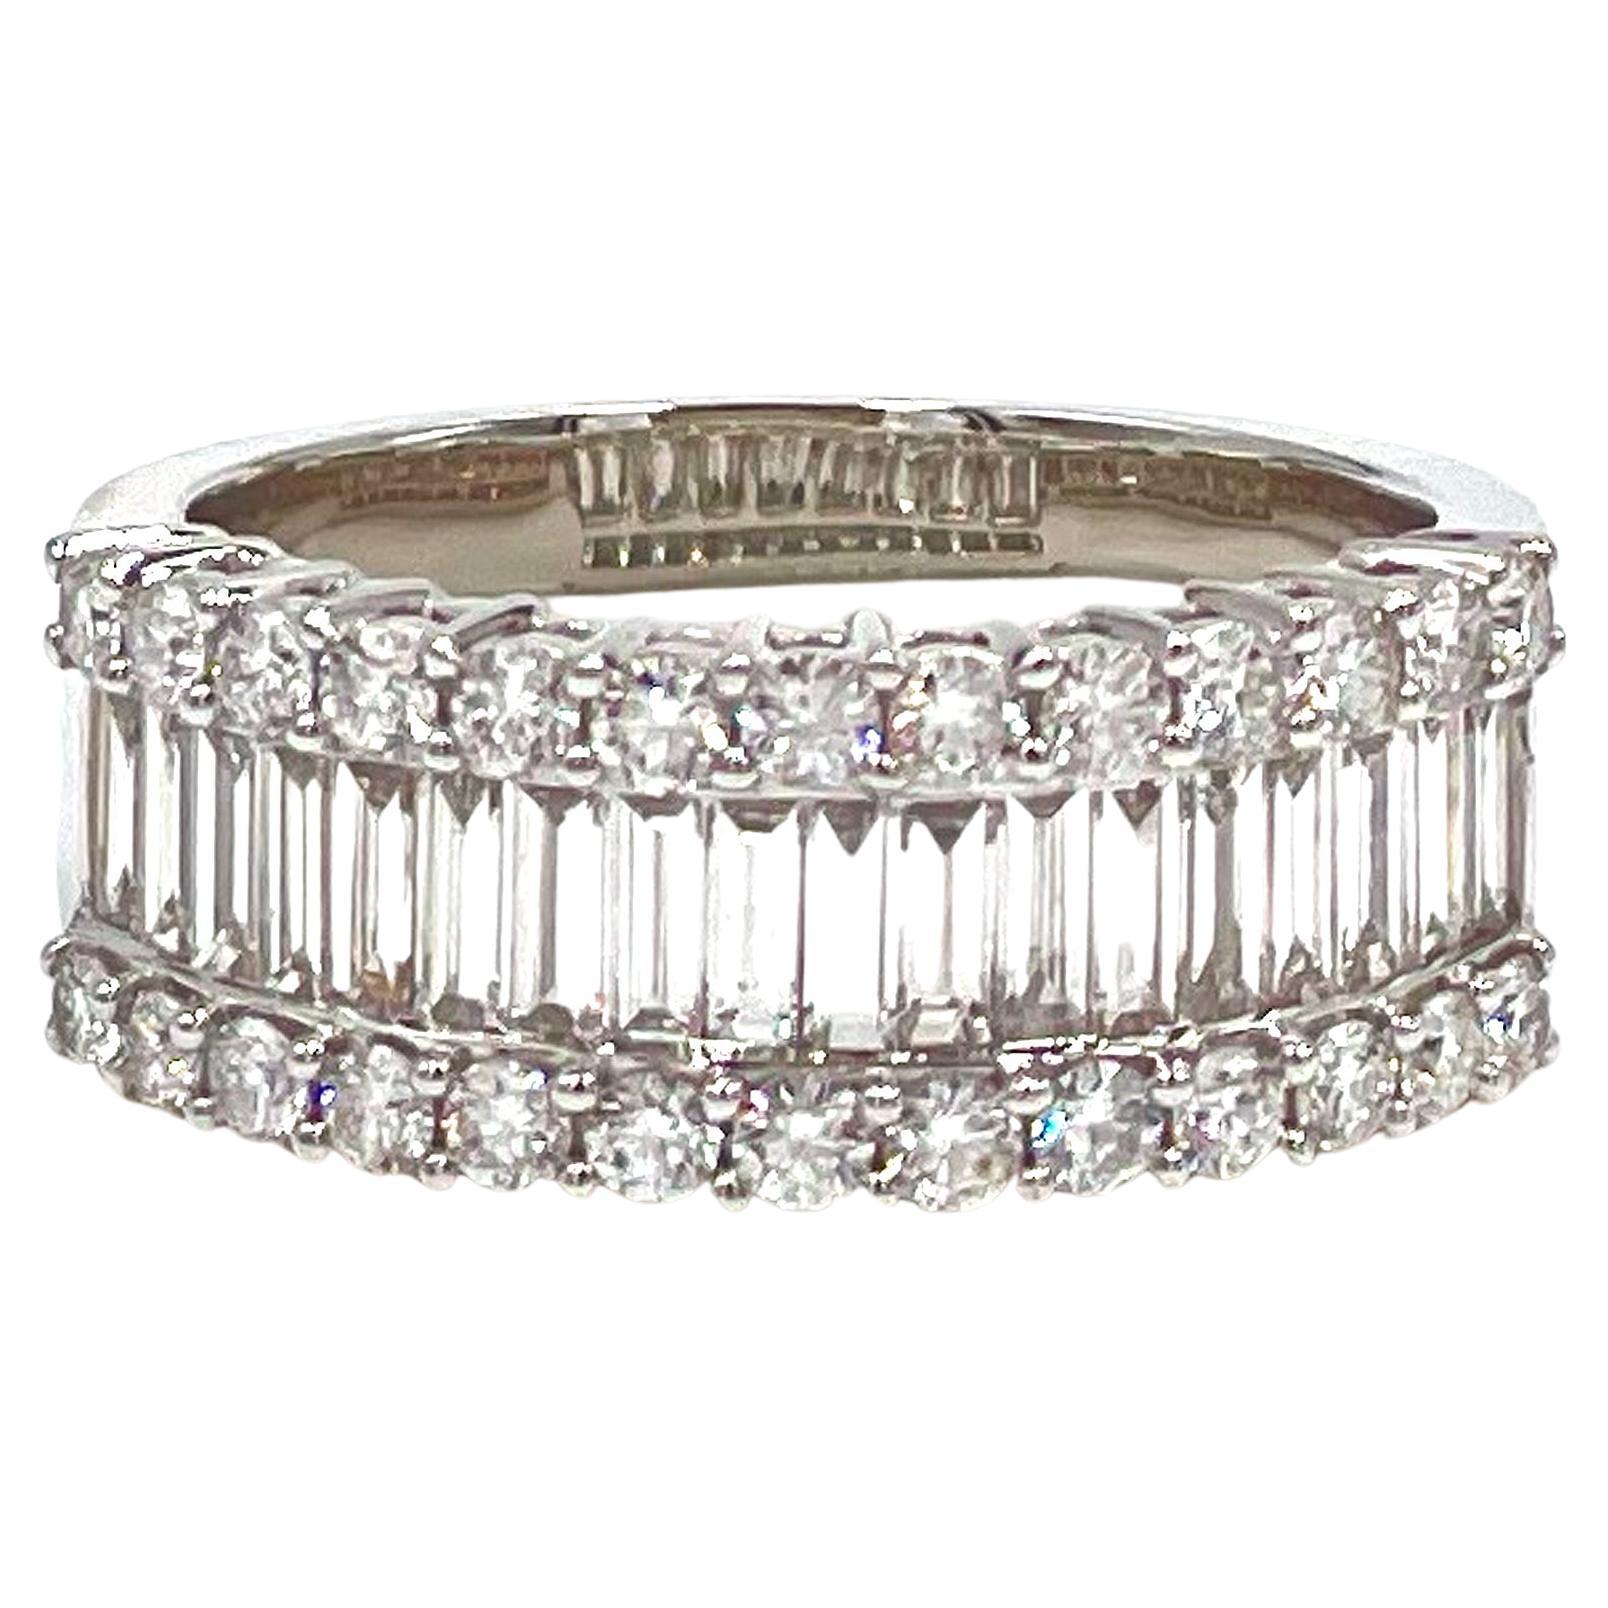 18K White Gold Baguette and Round Diamond Ring